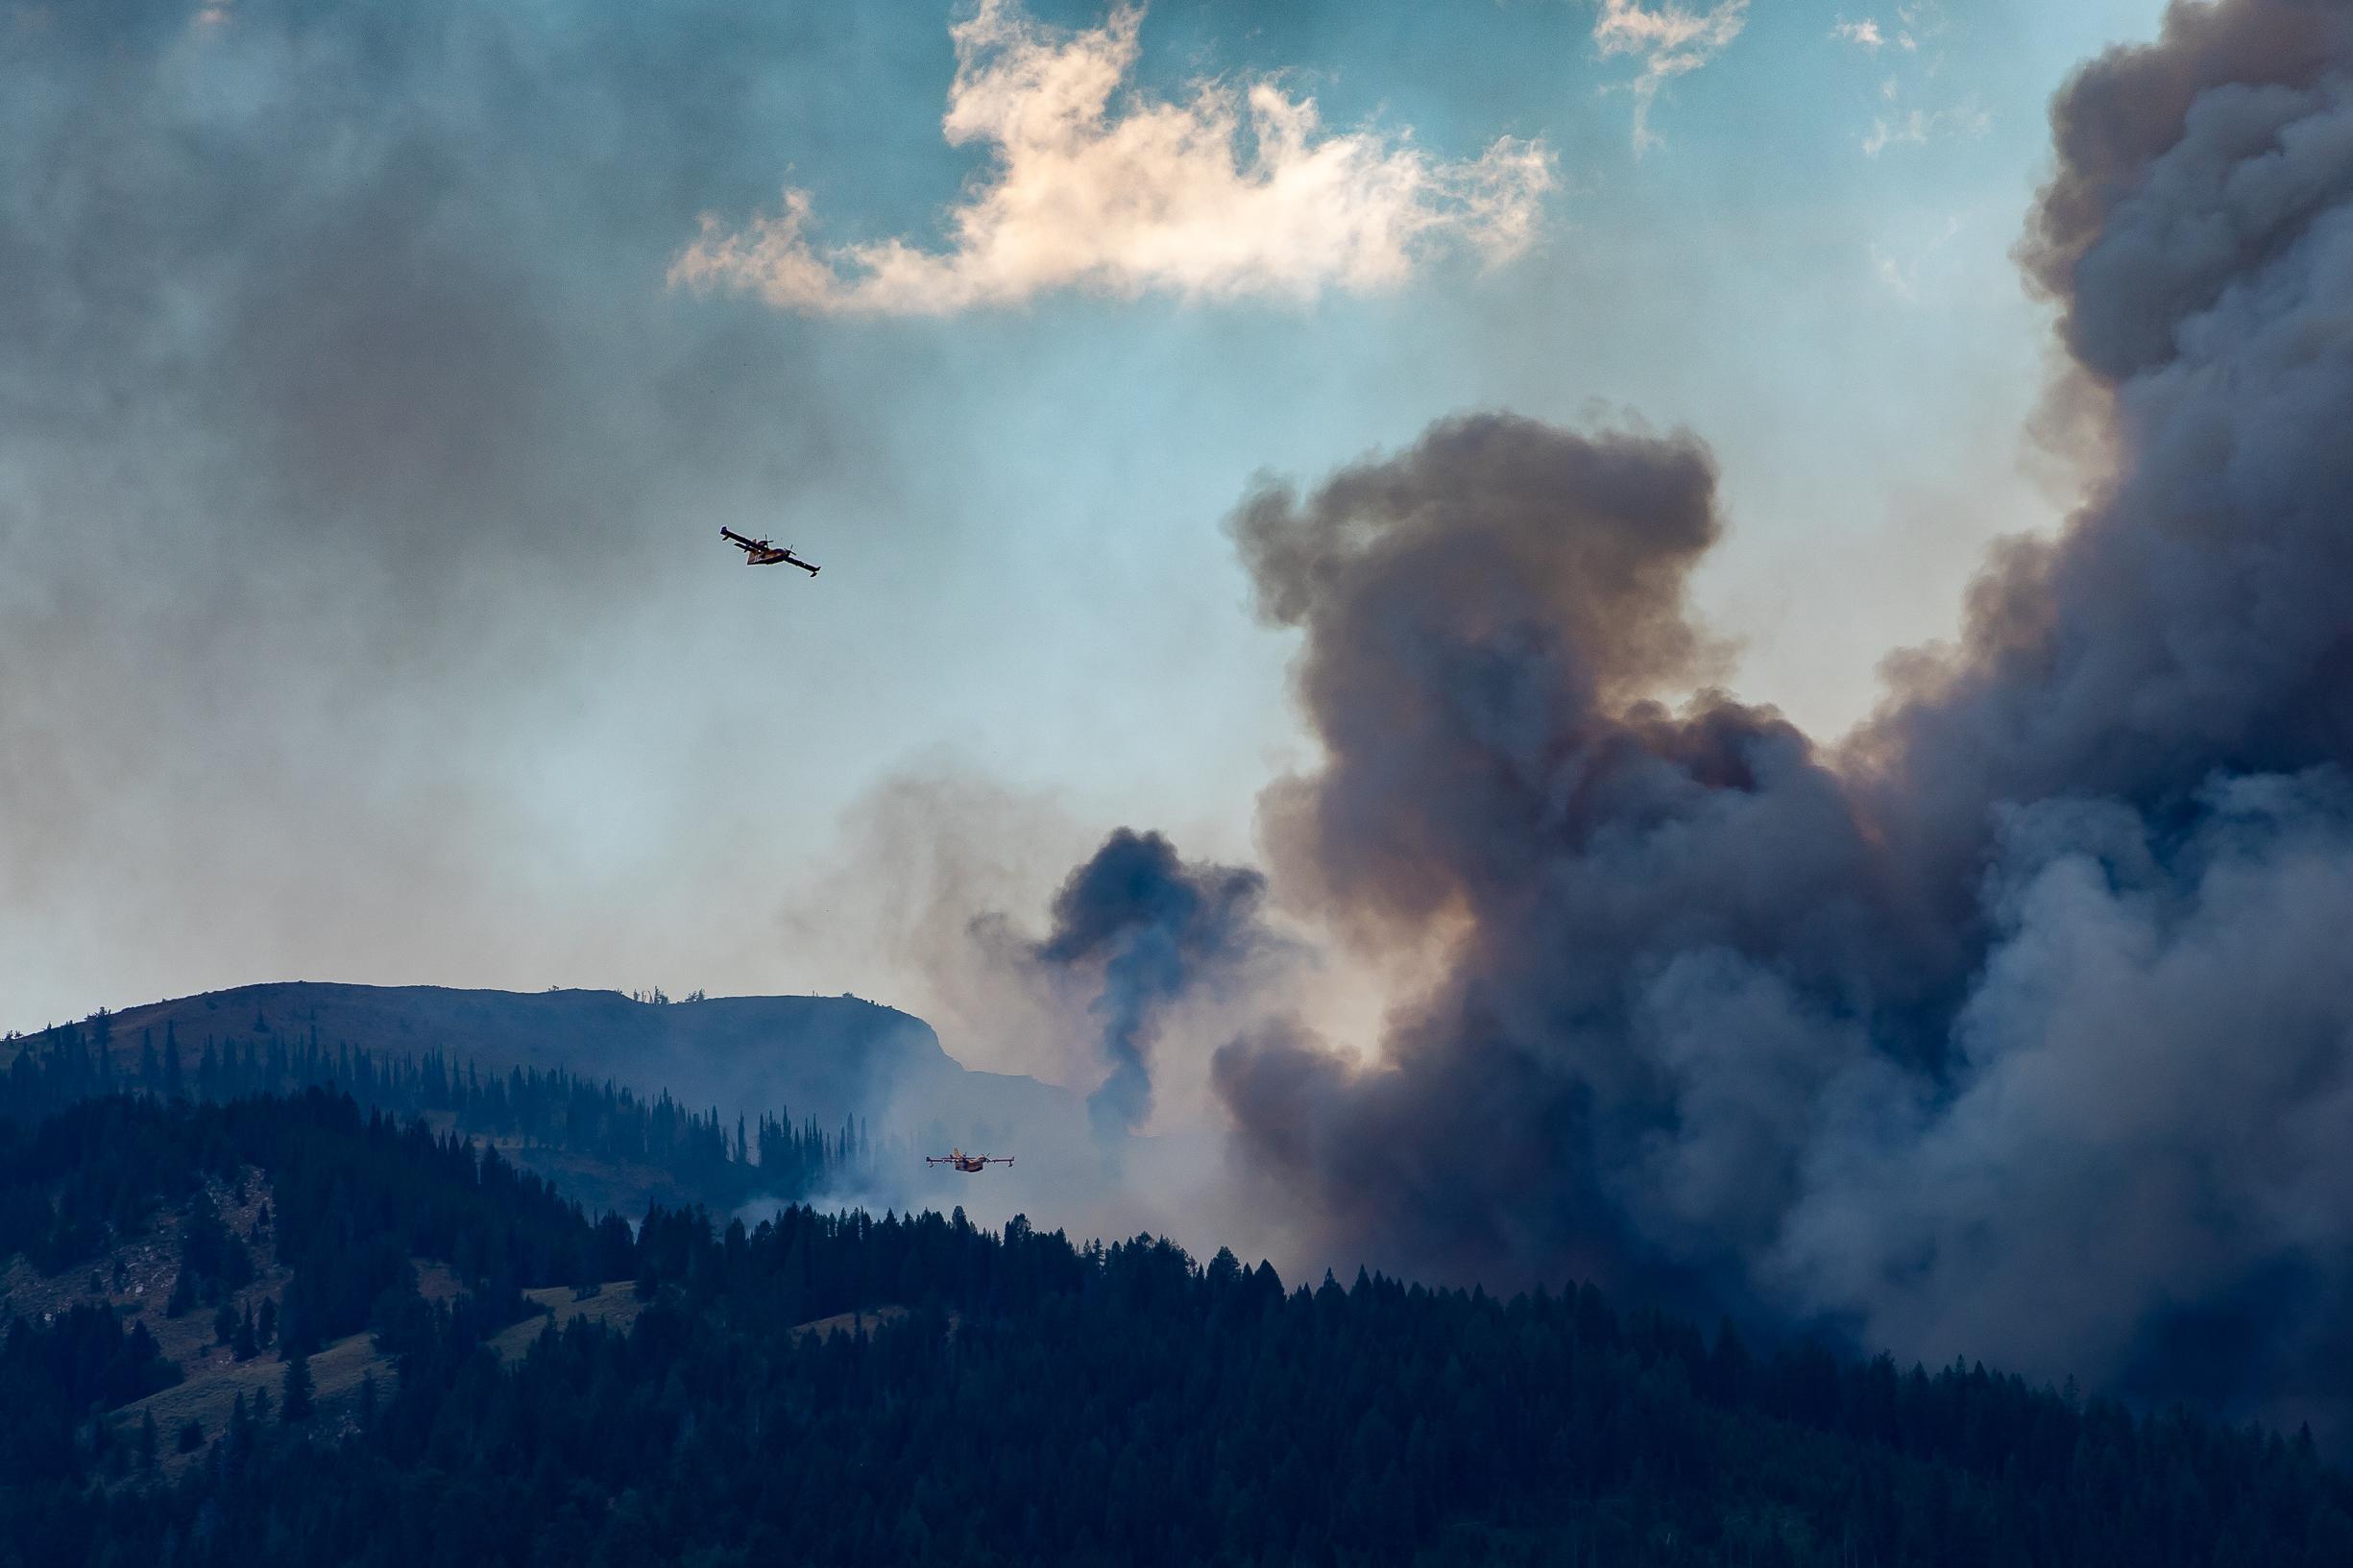 Two water carrying scooper planes fly over the mountains with smoke.